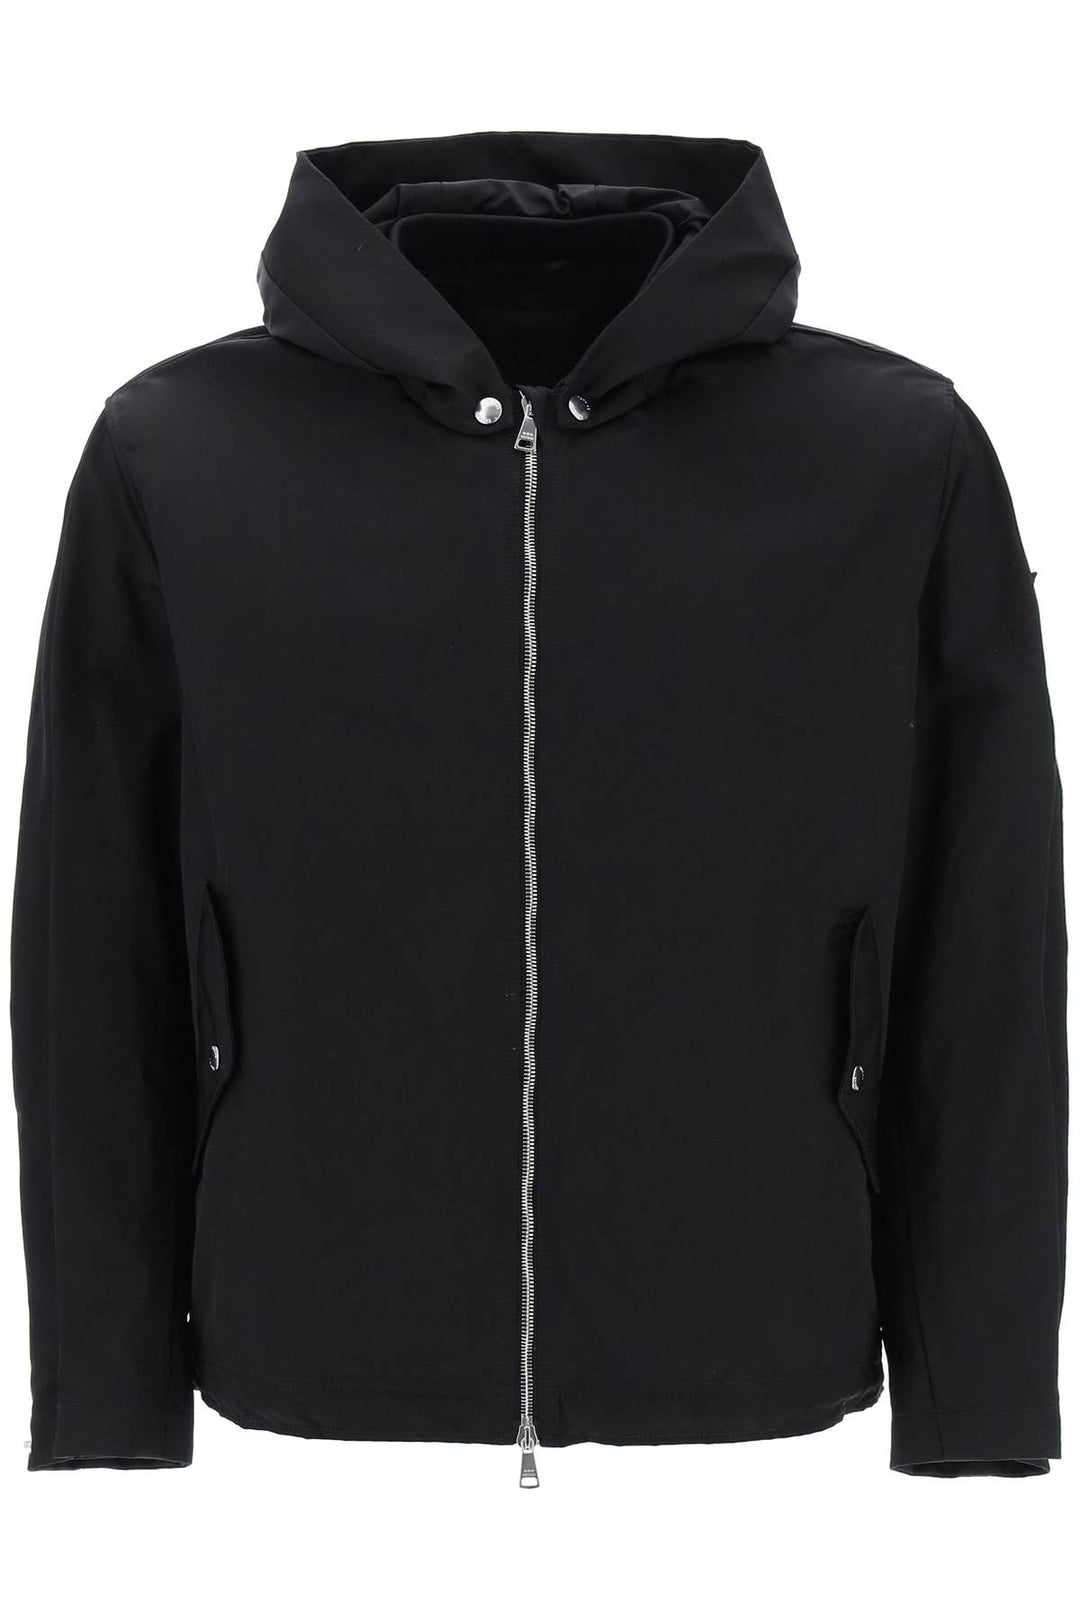 Tatras Hooded Jacket With Removable Hood Necetto   Nero